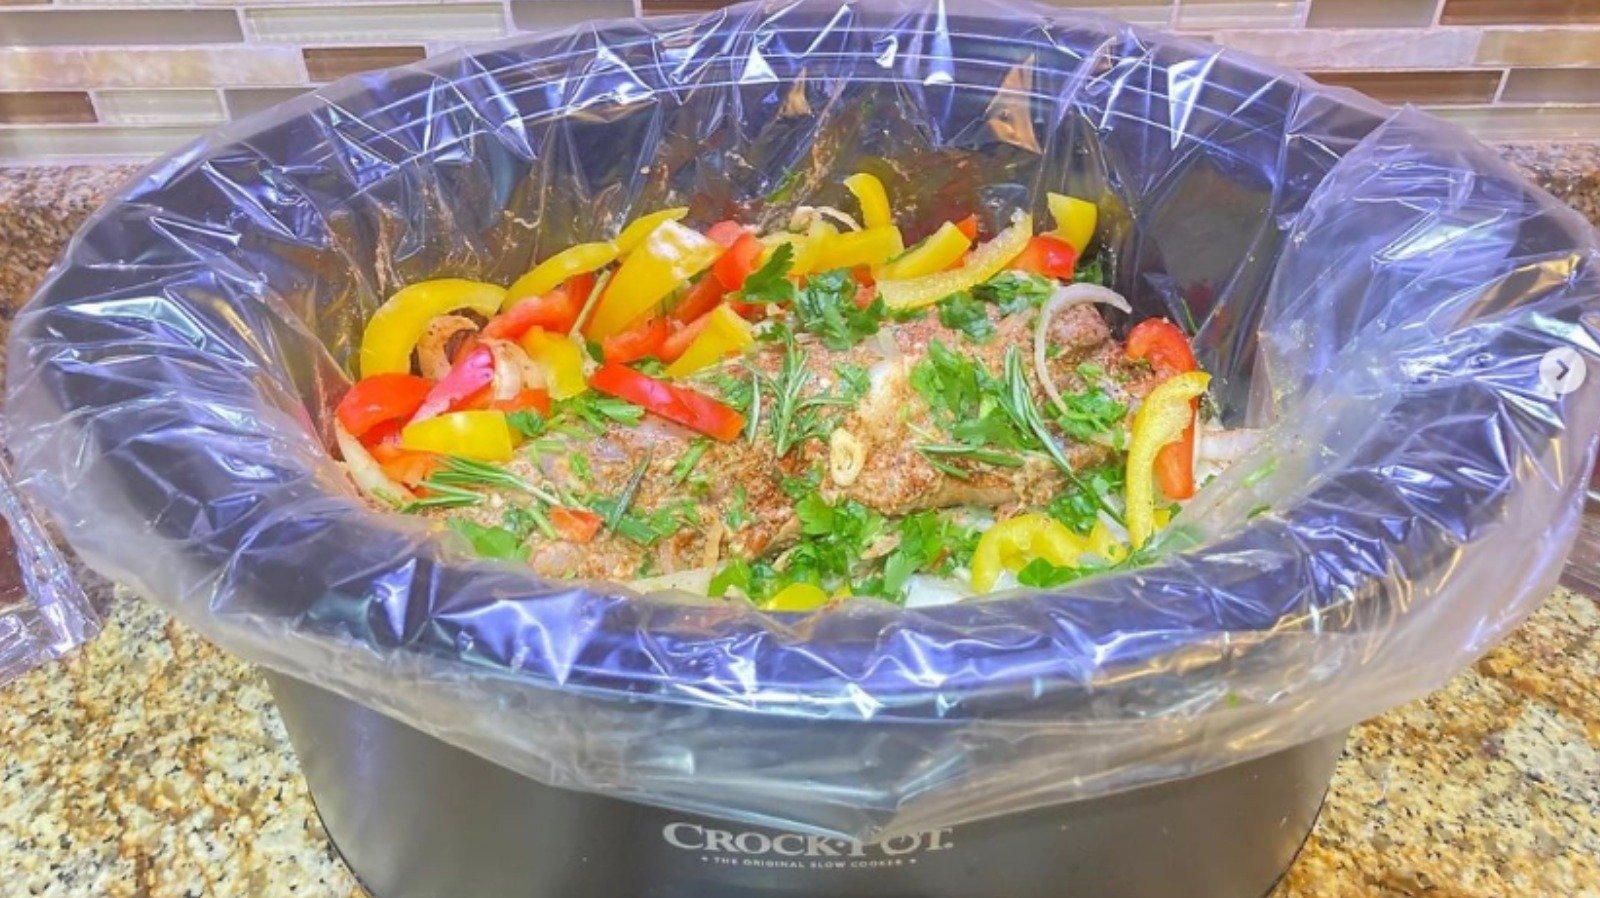 Should You Use Plastic Liners In Your Slow Cooker? - Mashed